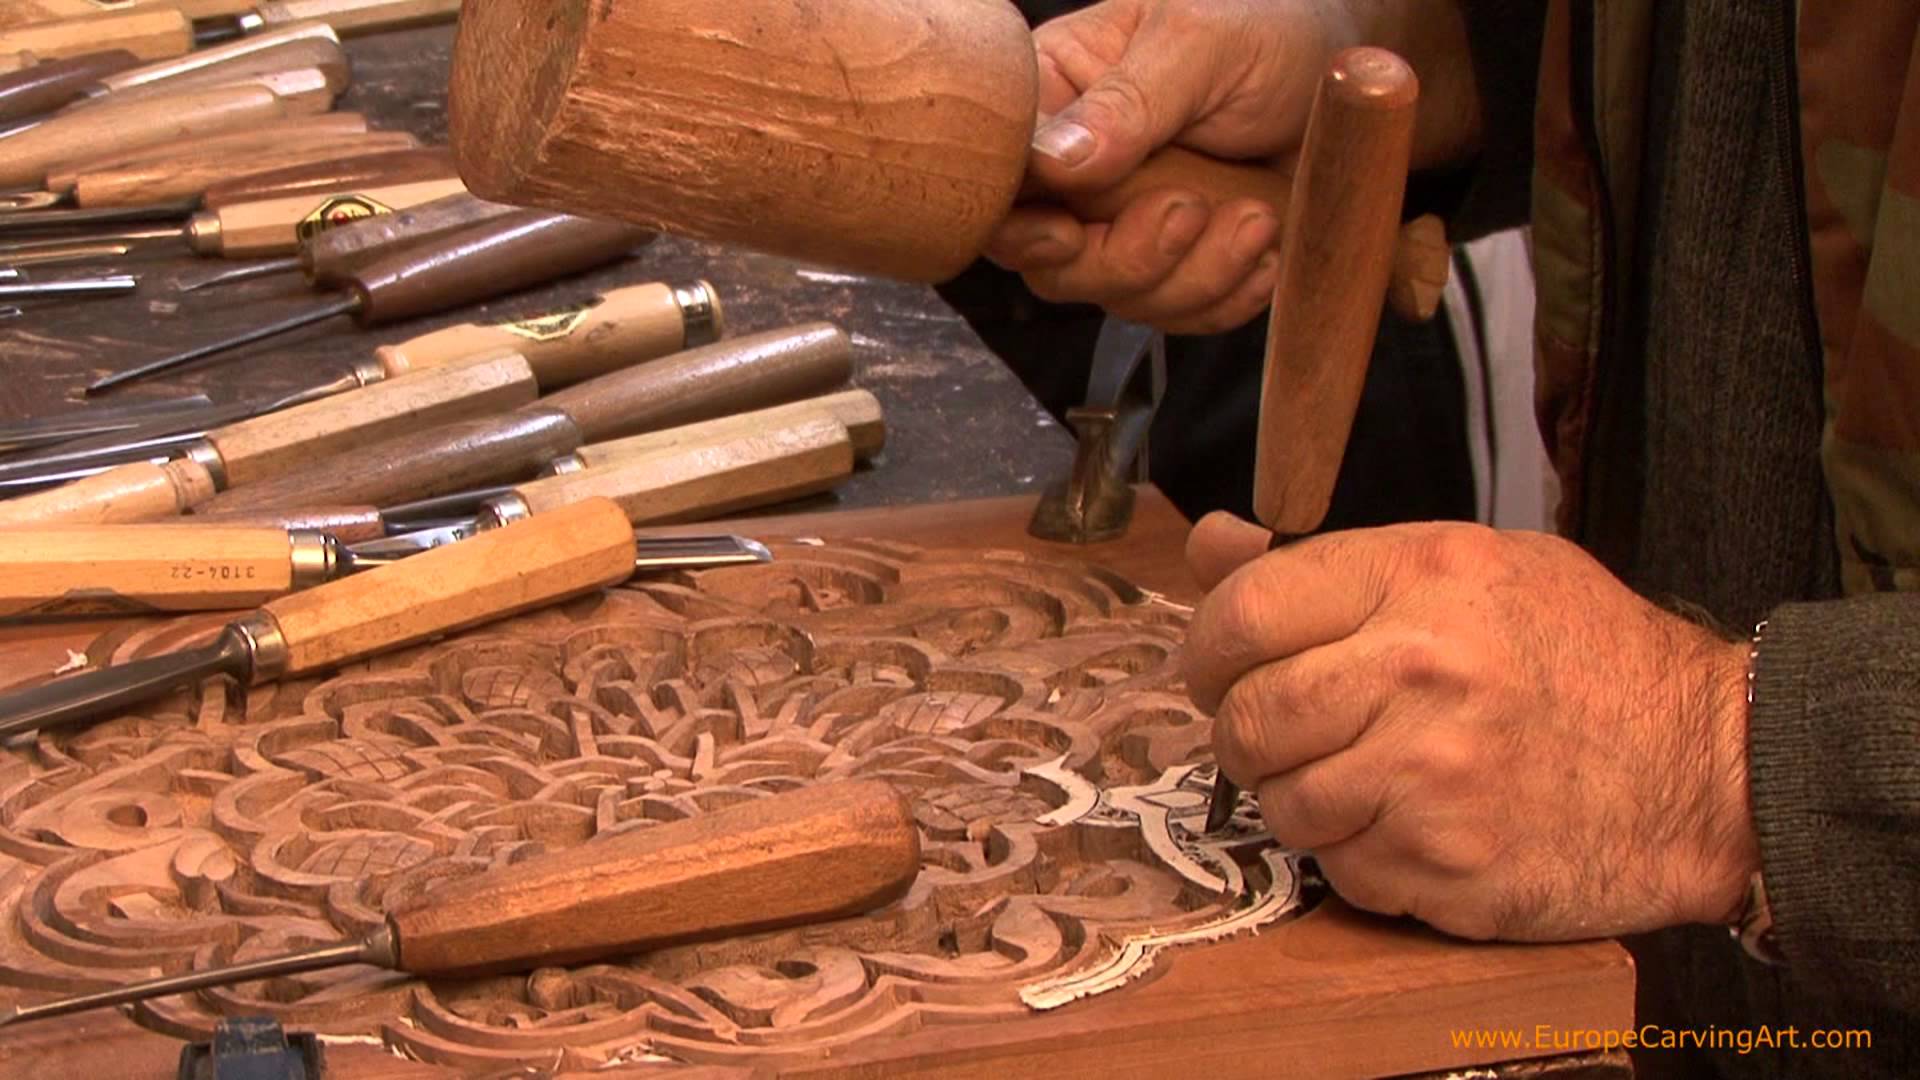 The Process of Wood Hand-Carving the Arabesque - YouTube